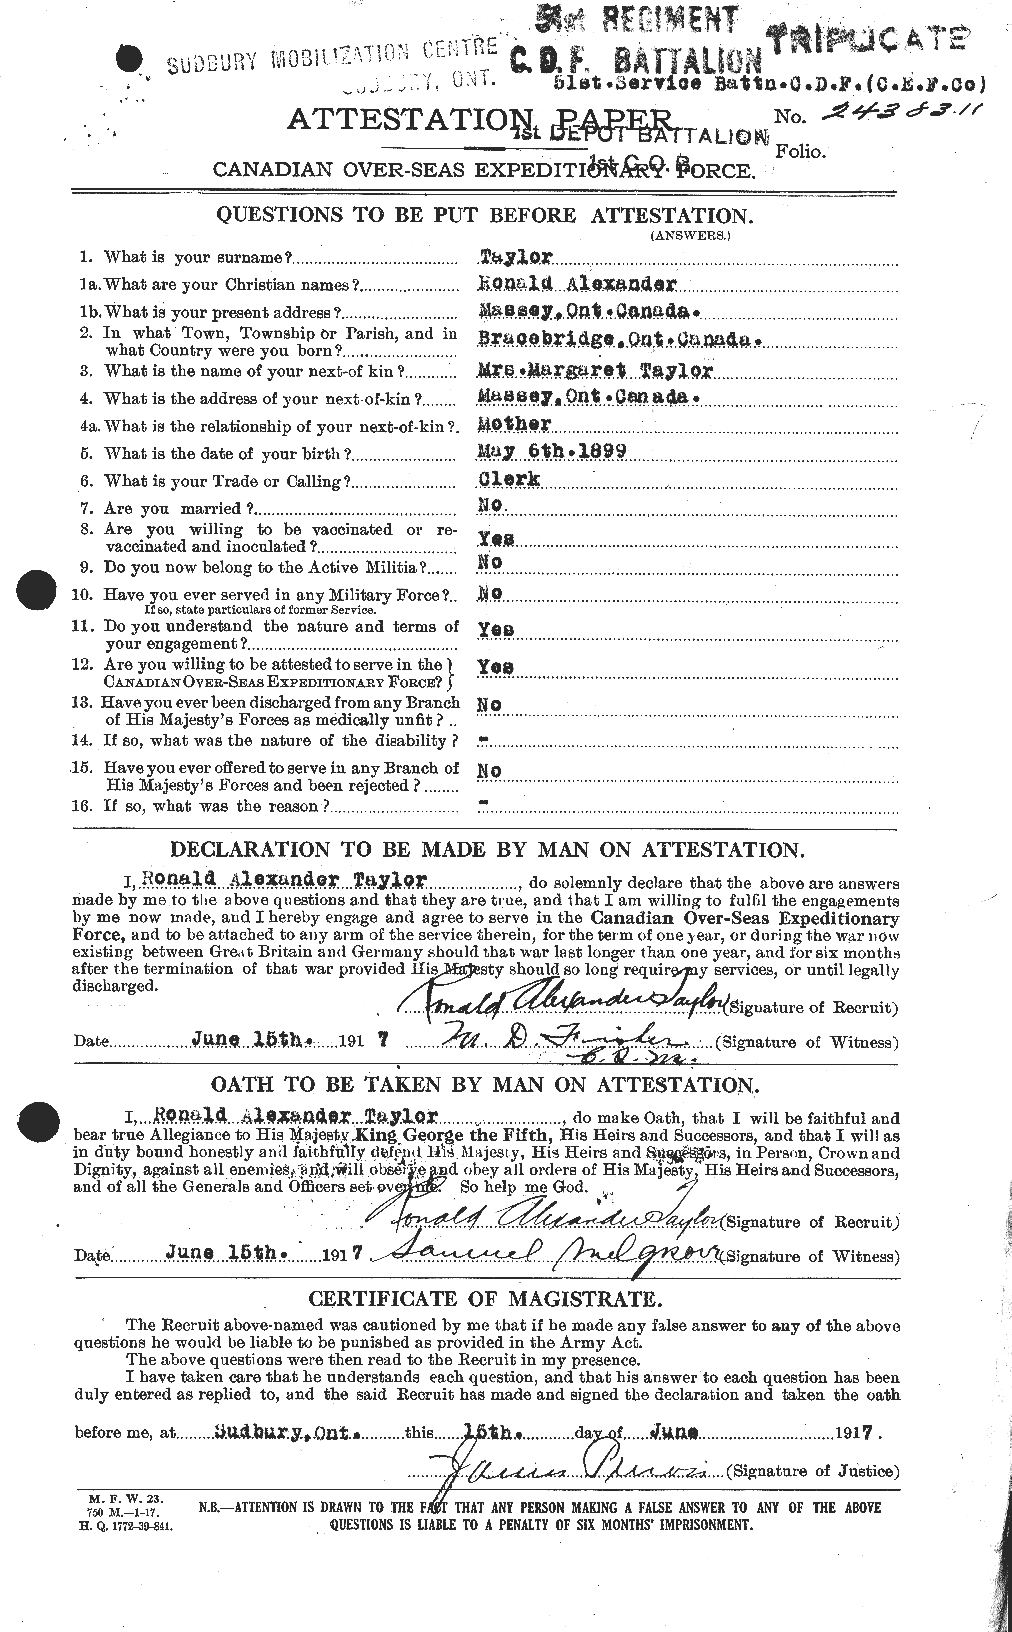 Personnel Records of the First World War - CEF 627508a